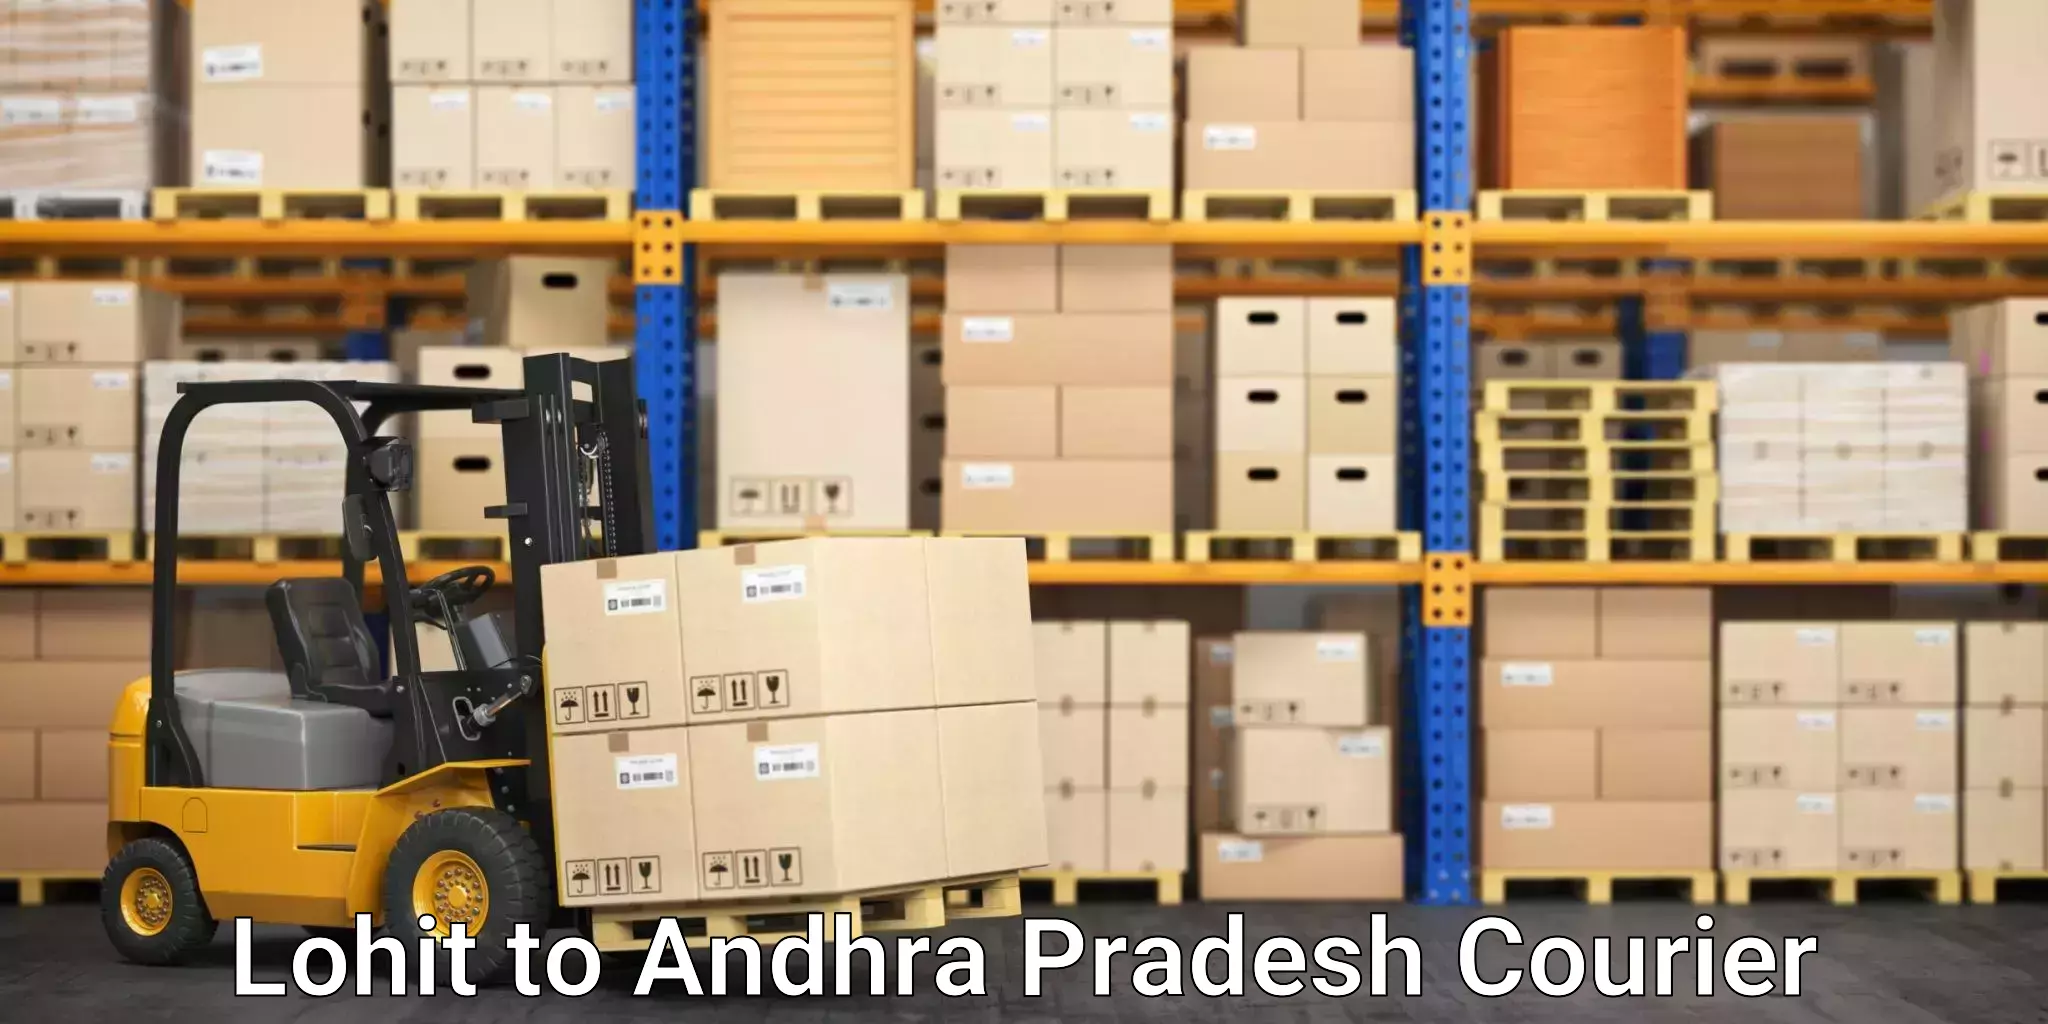 Nationwide shipping capabilities Lohit to Madanapalle